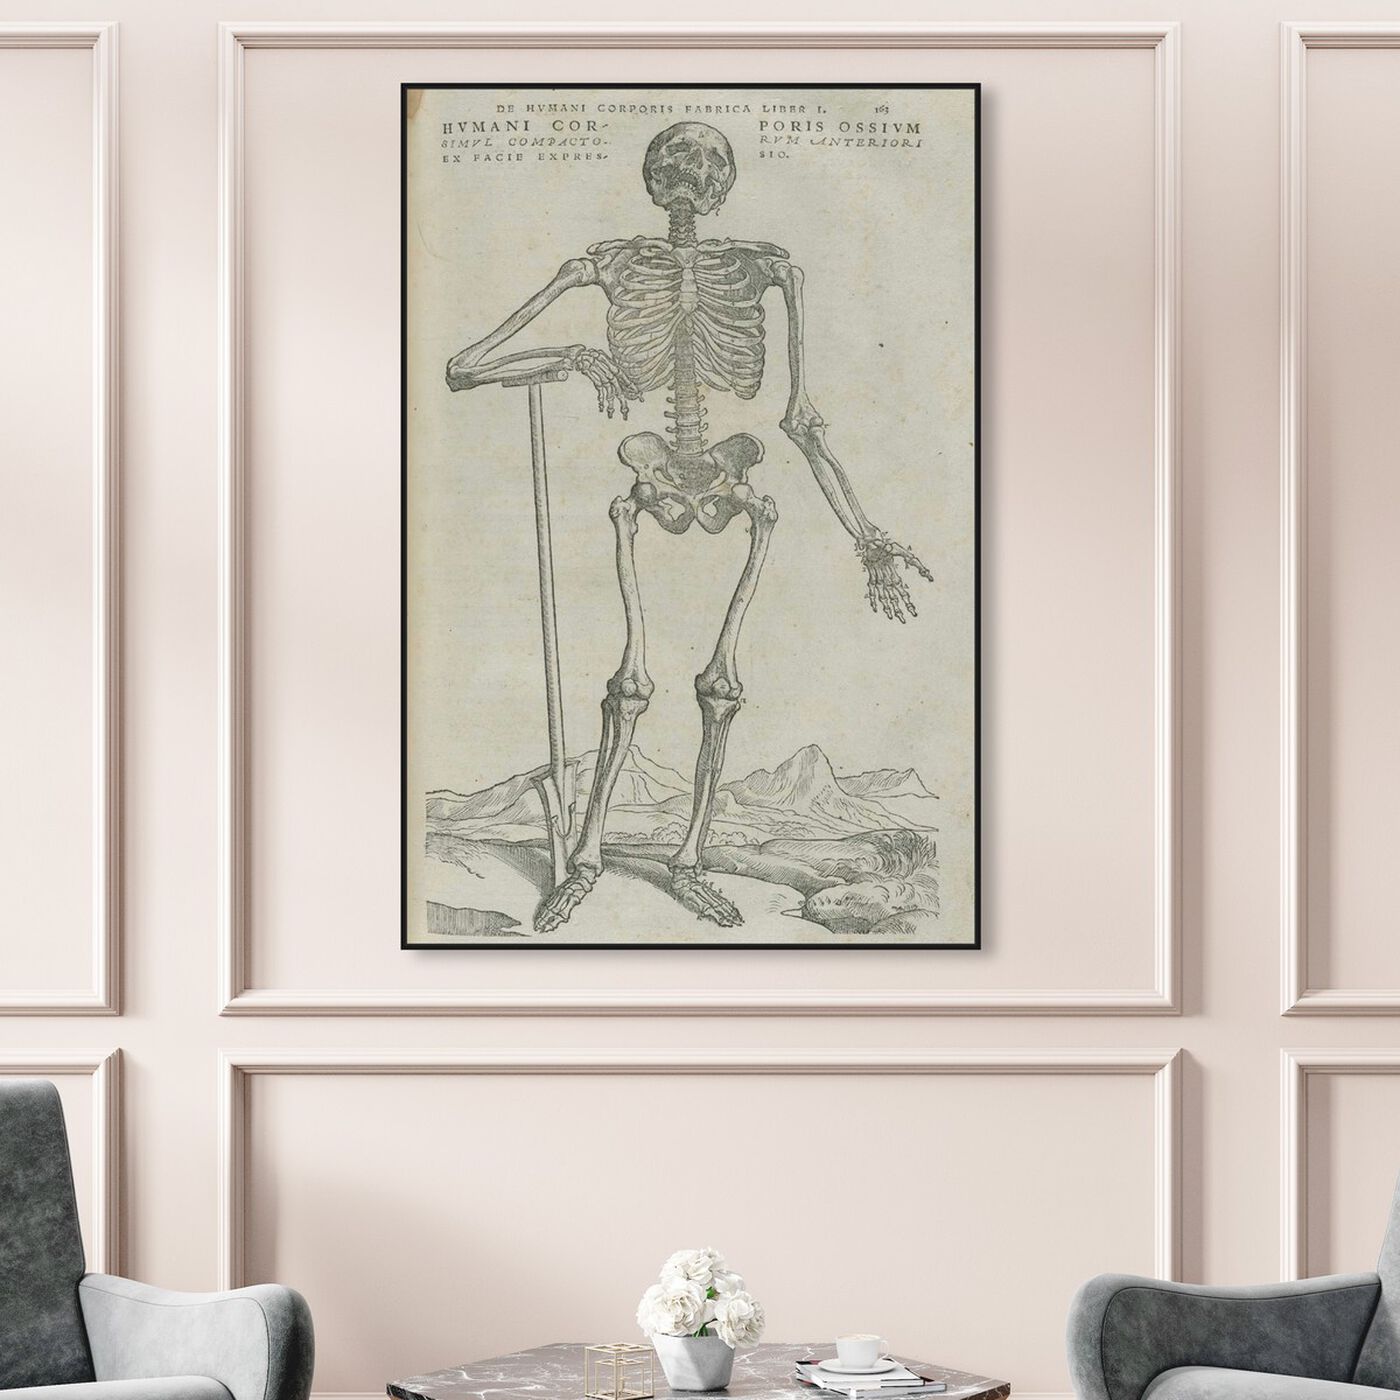 Hanging view of Vesalius VIII - The Art Cabinet featuring symbols and objects and skull art.